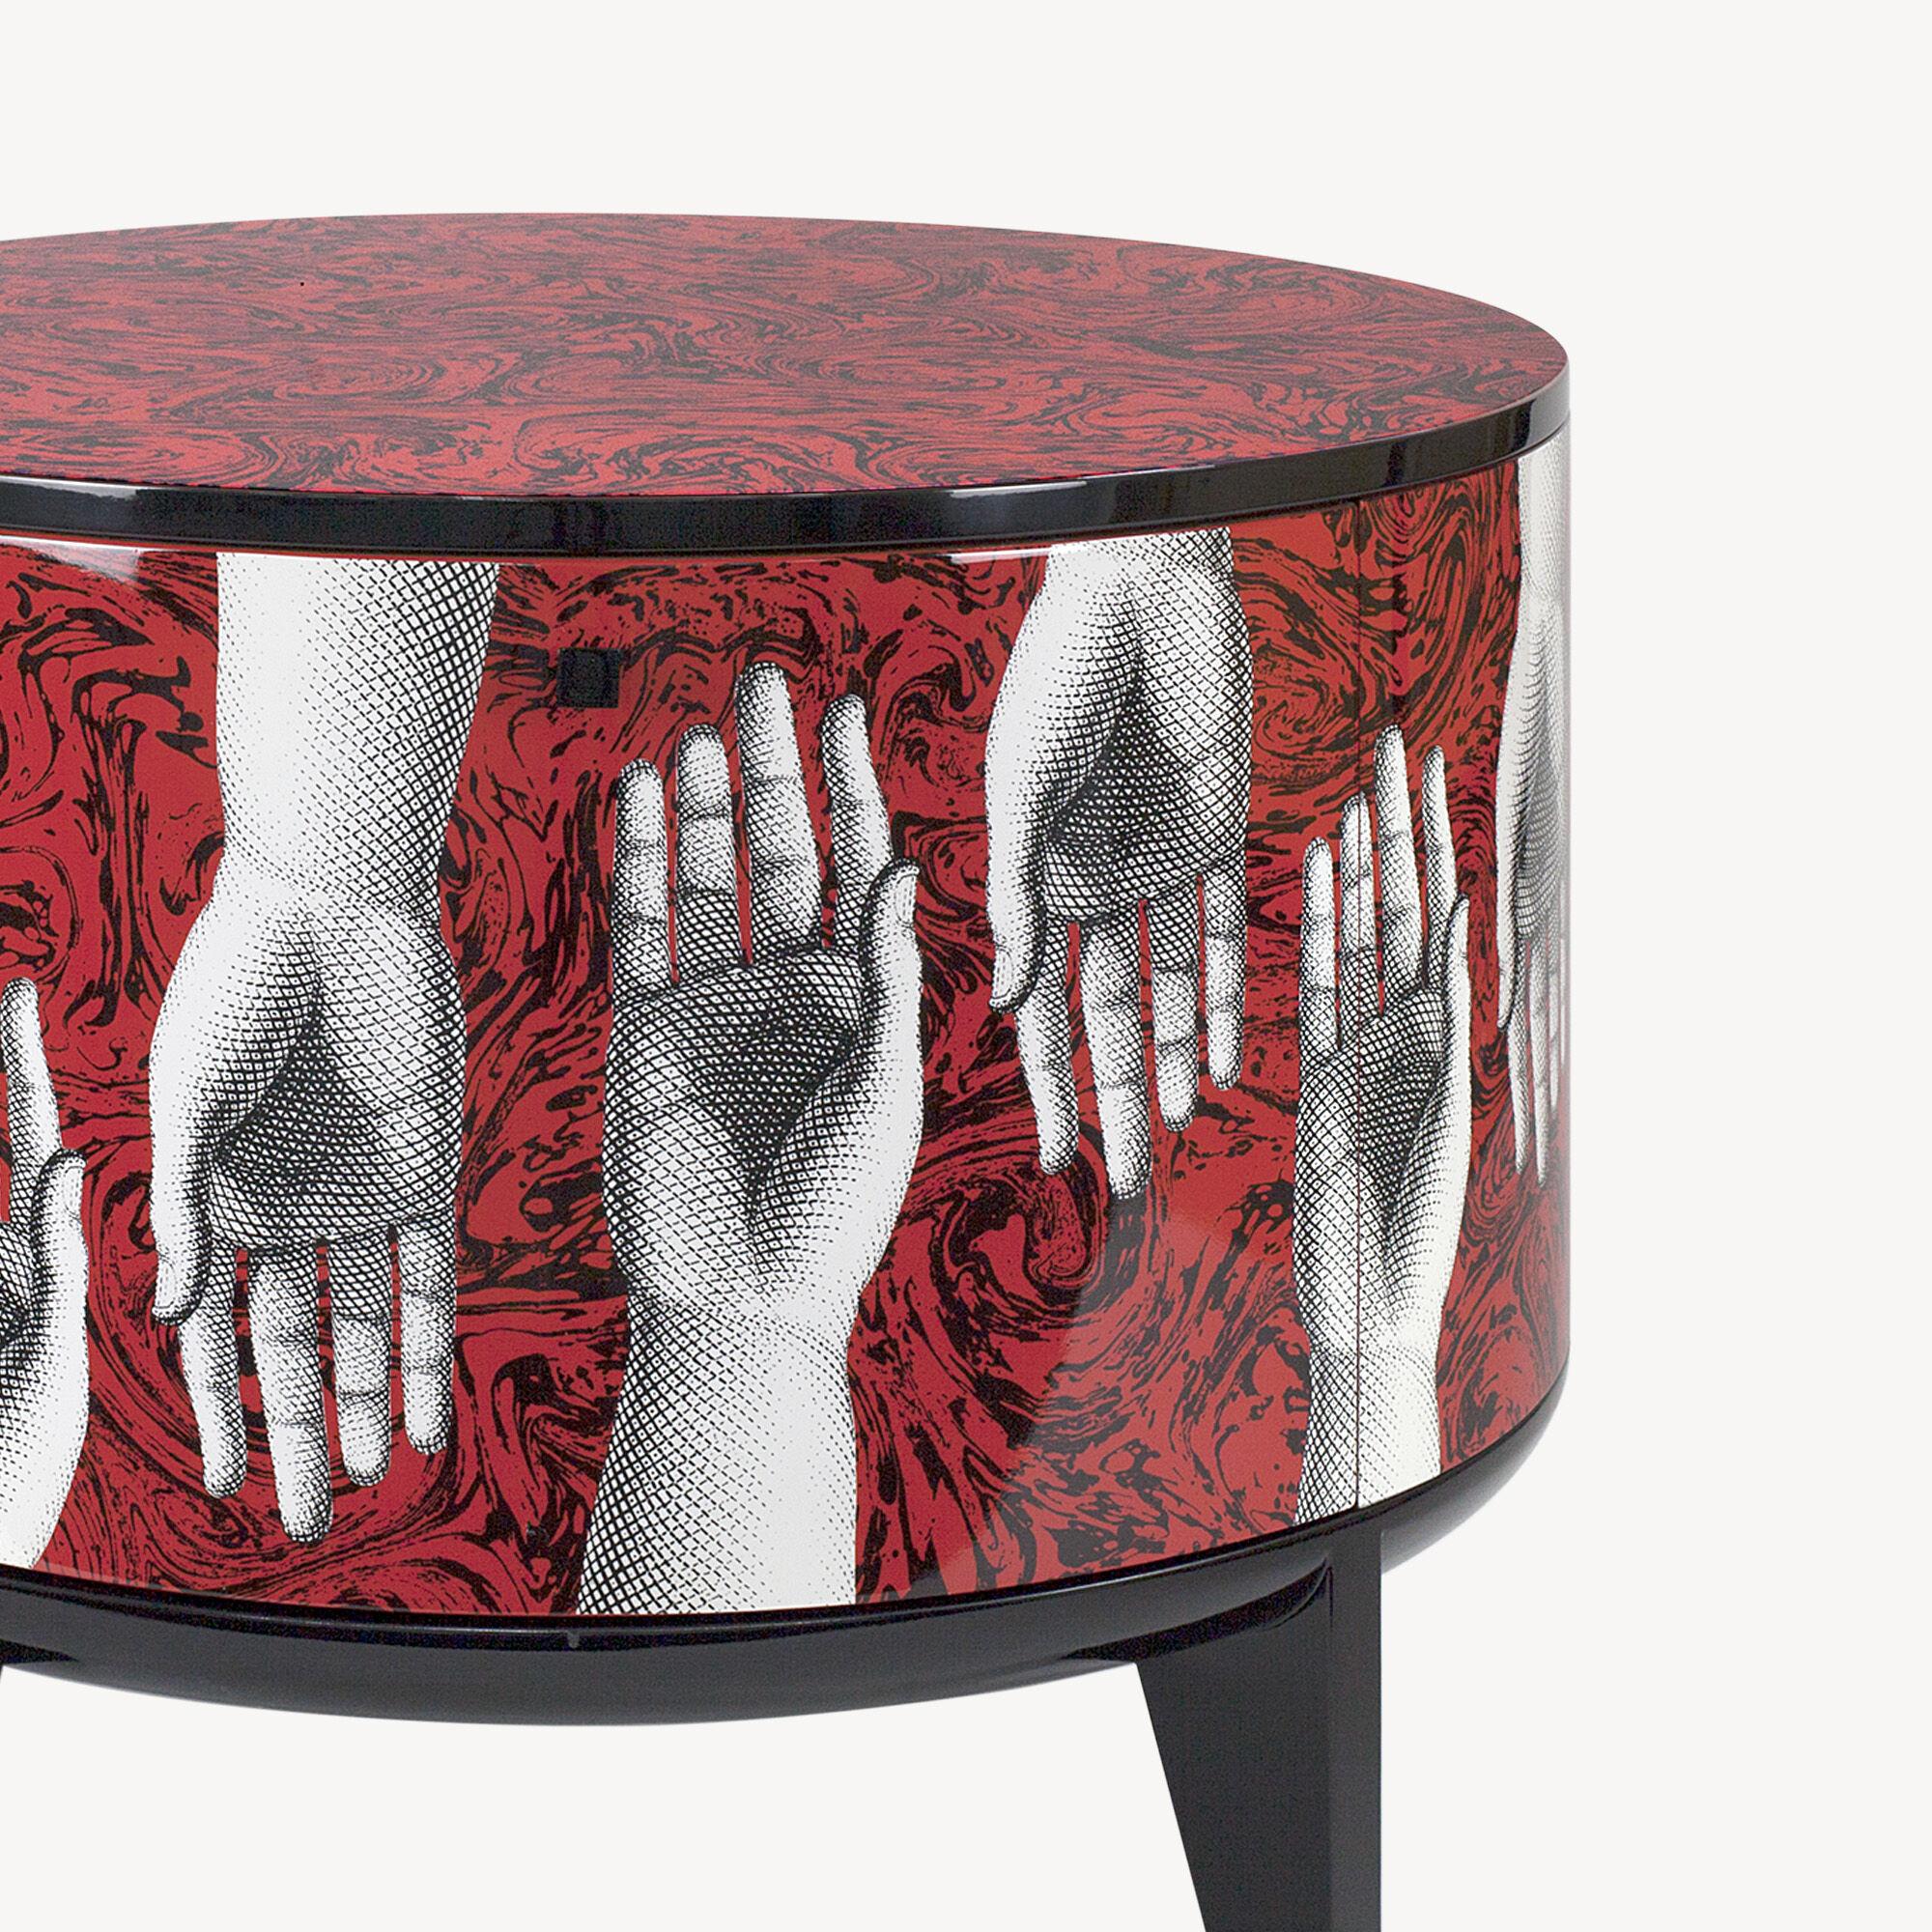 The Fornasetti Tamburo is a wooden storage piece of furniture. its versatile shape turns it into a table. the wood is silkscreened and laquered by hand following the Atelier's traditional method.

The decoration is Fornasetti's tribute to Mozart's